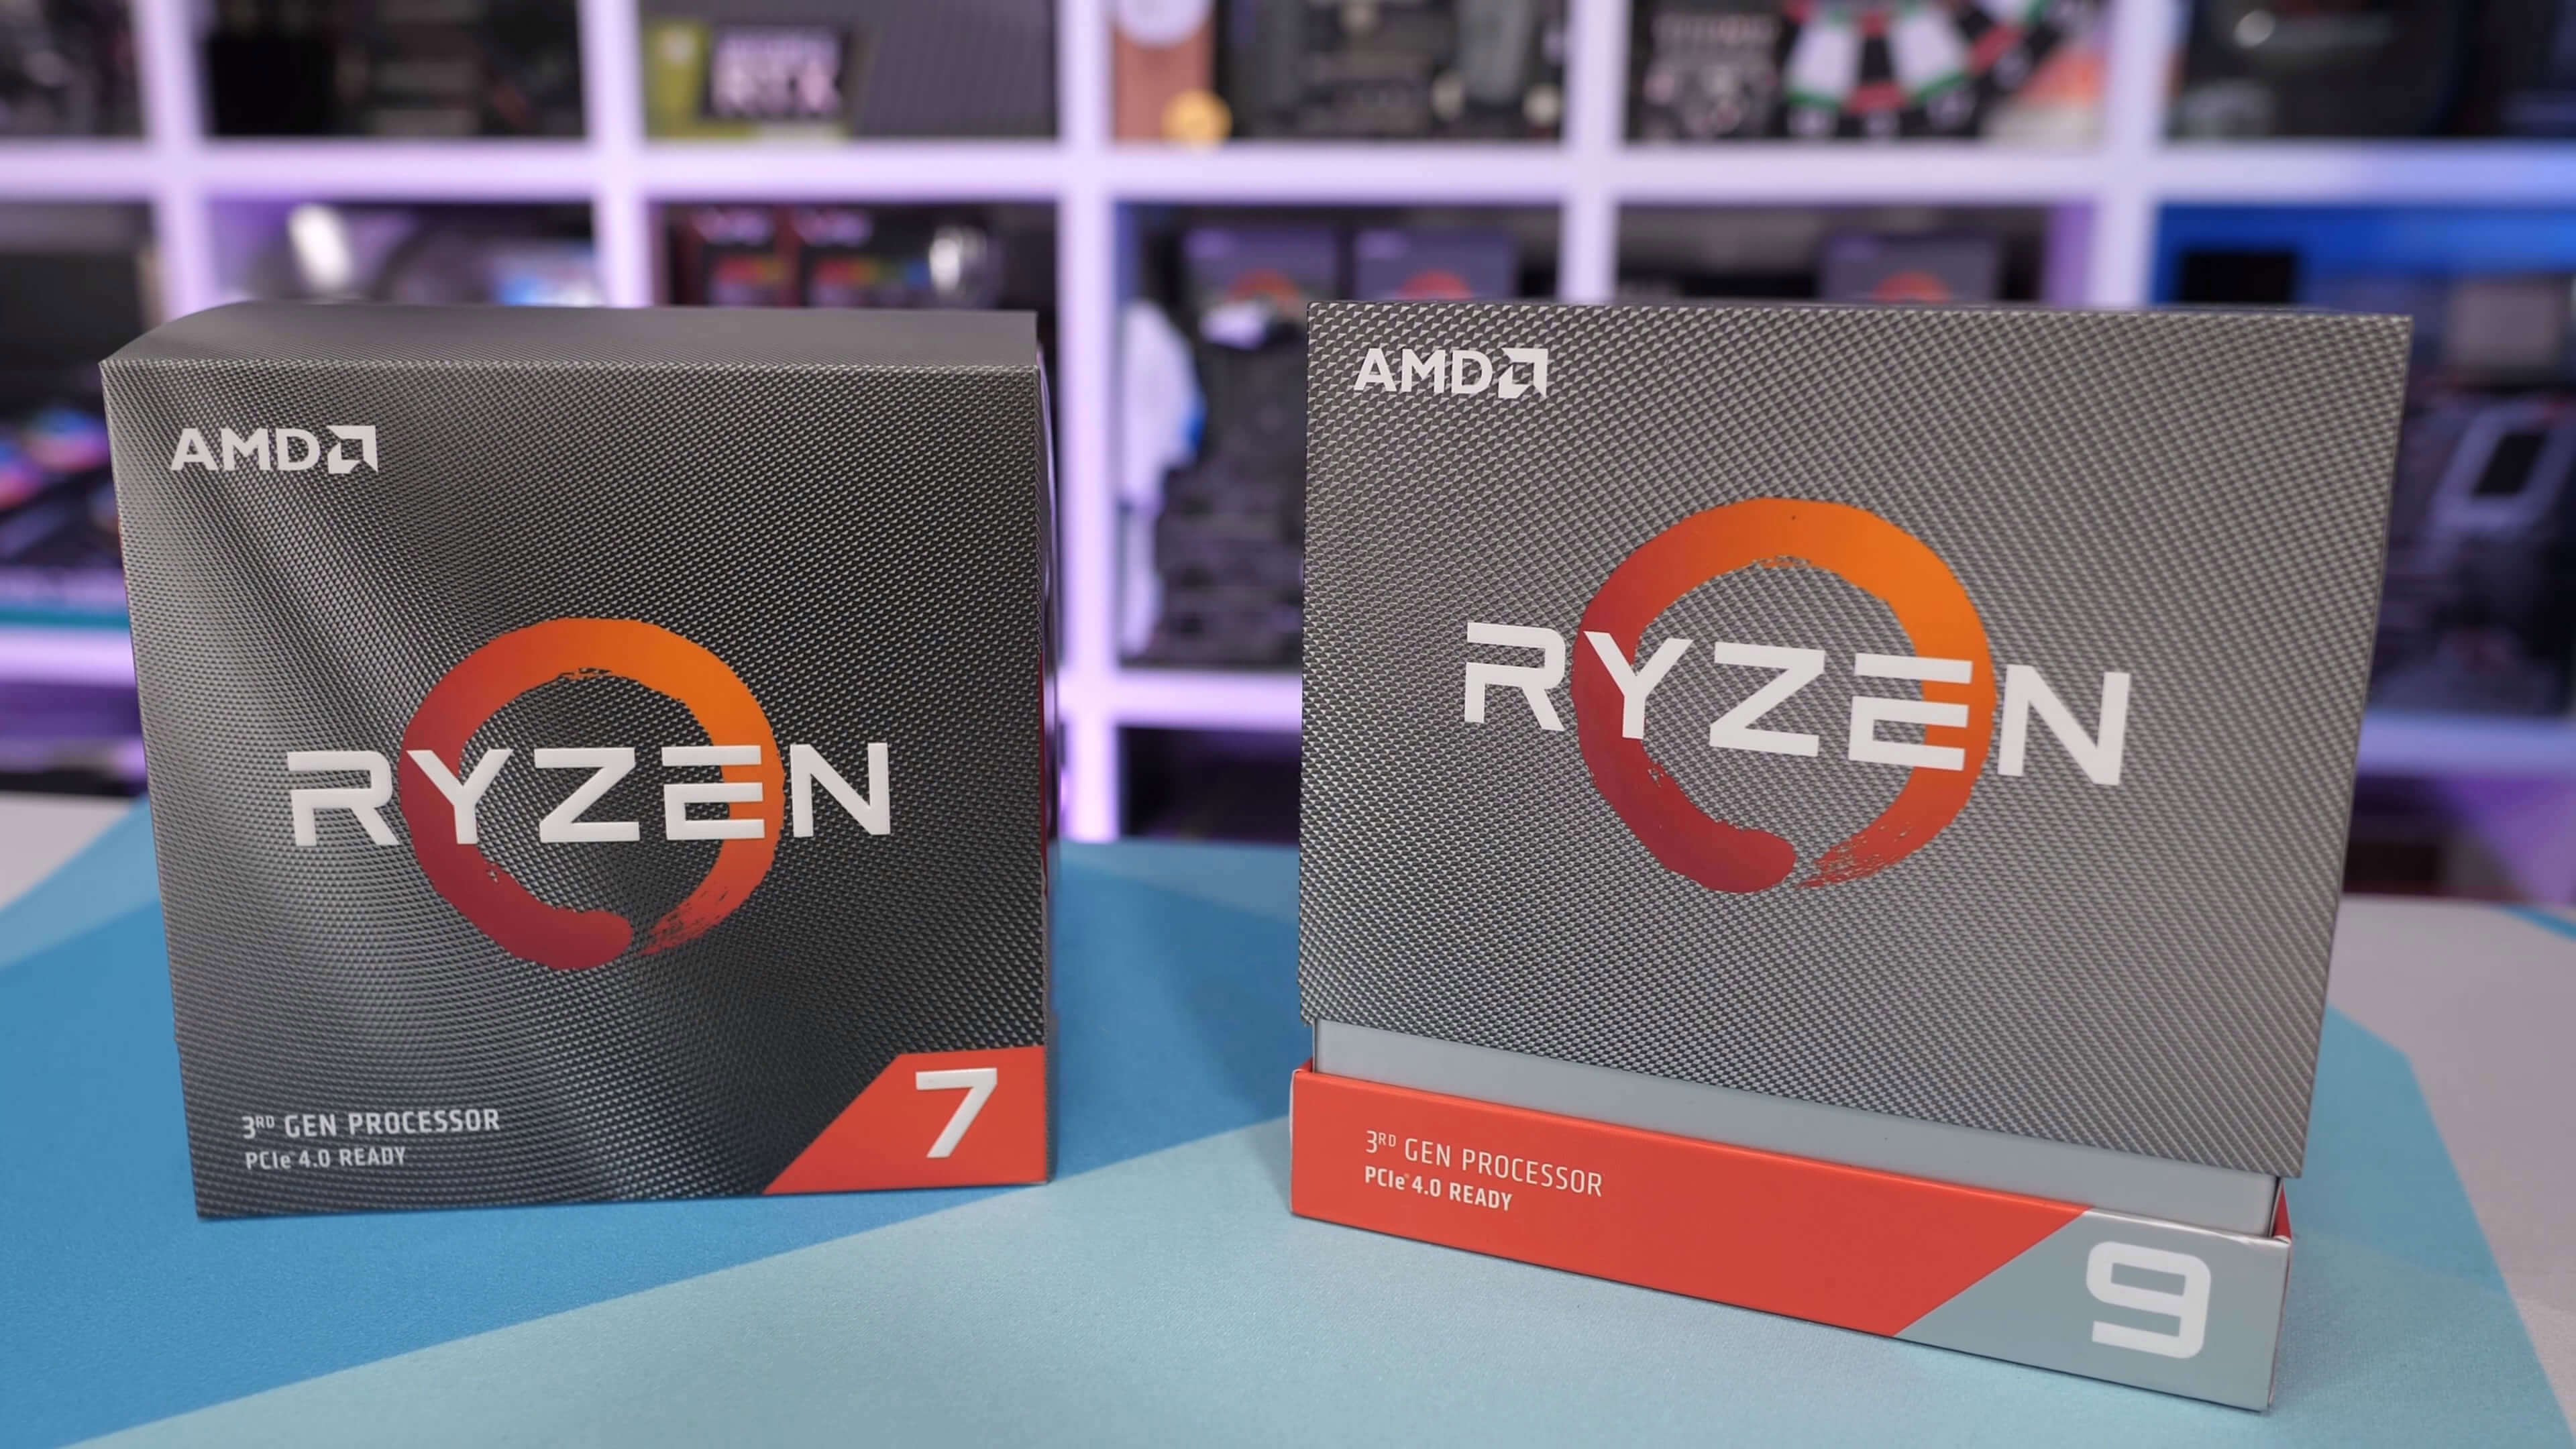 AMD is dominating Intel in Amazon's best-selling CPUs list